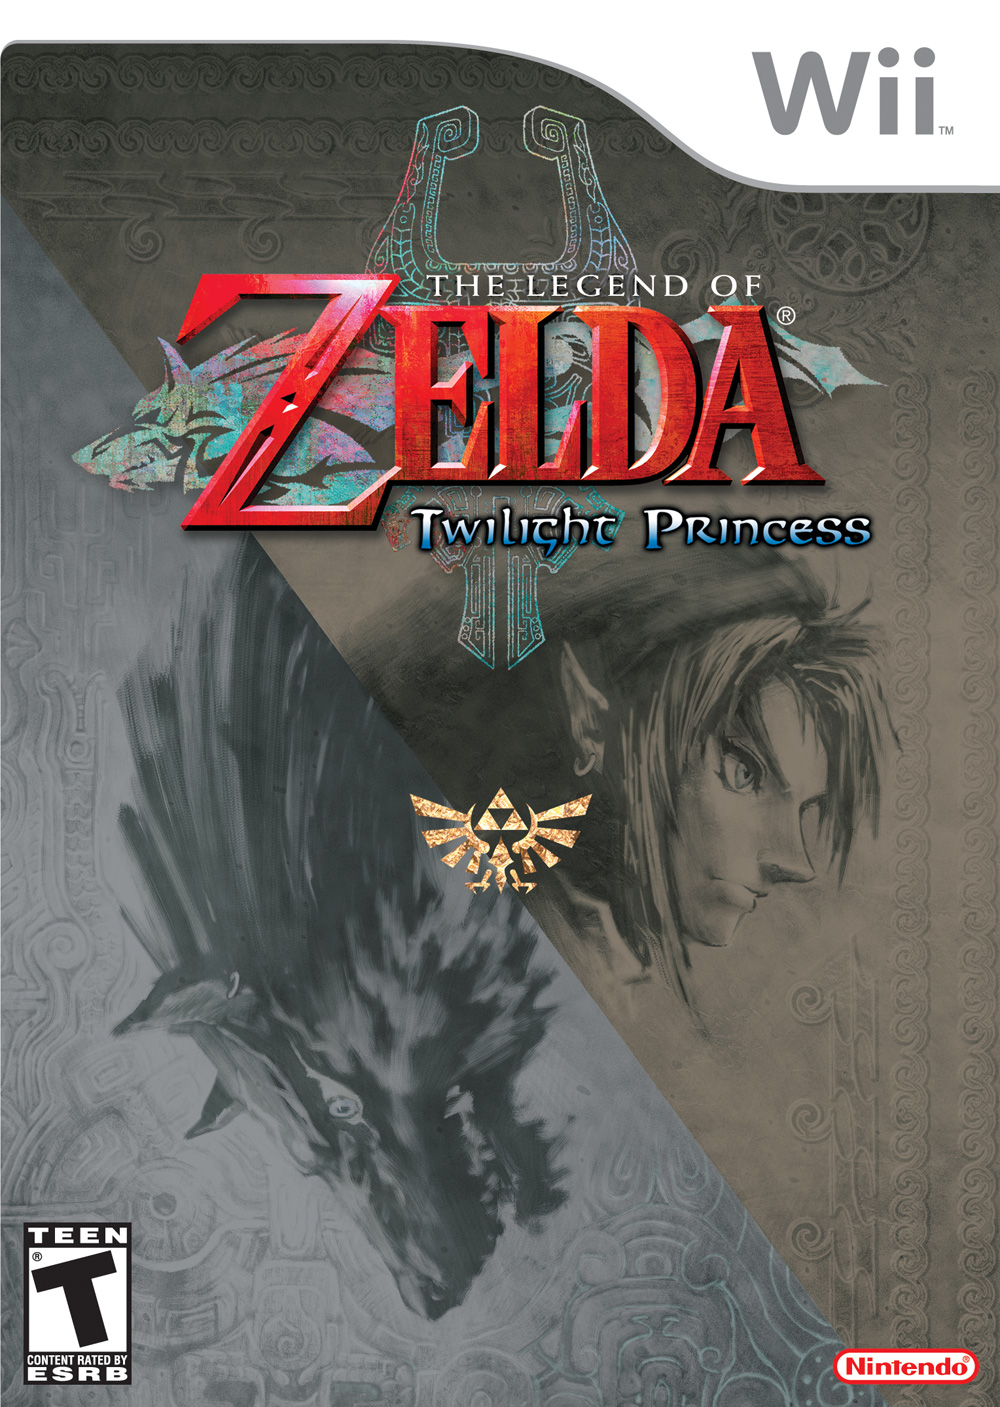 the-legend-of-zelda-twilight-princess-strategywiki-the-video-game-walkthrough-and-strategy